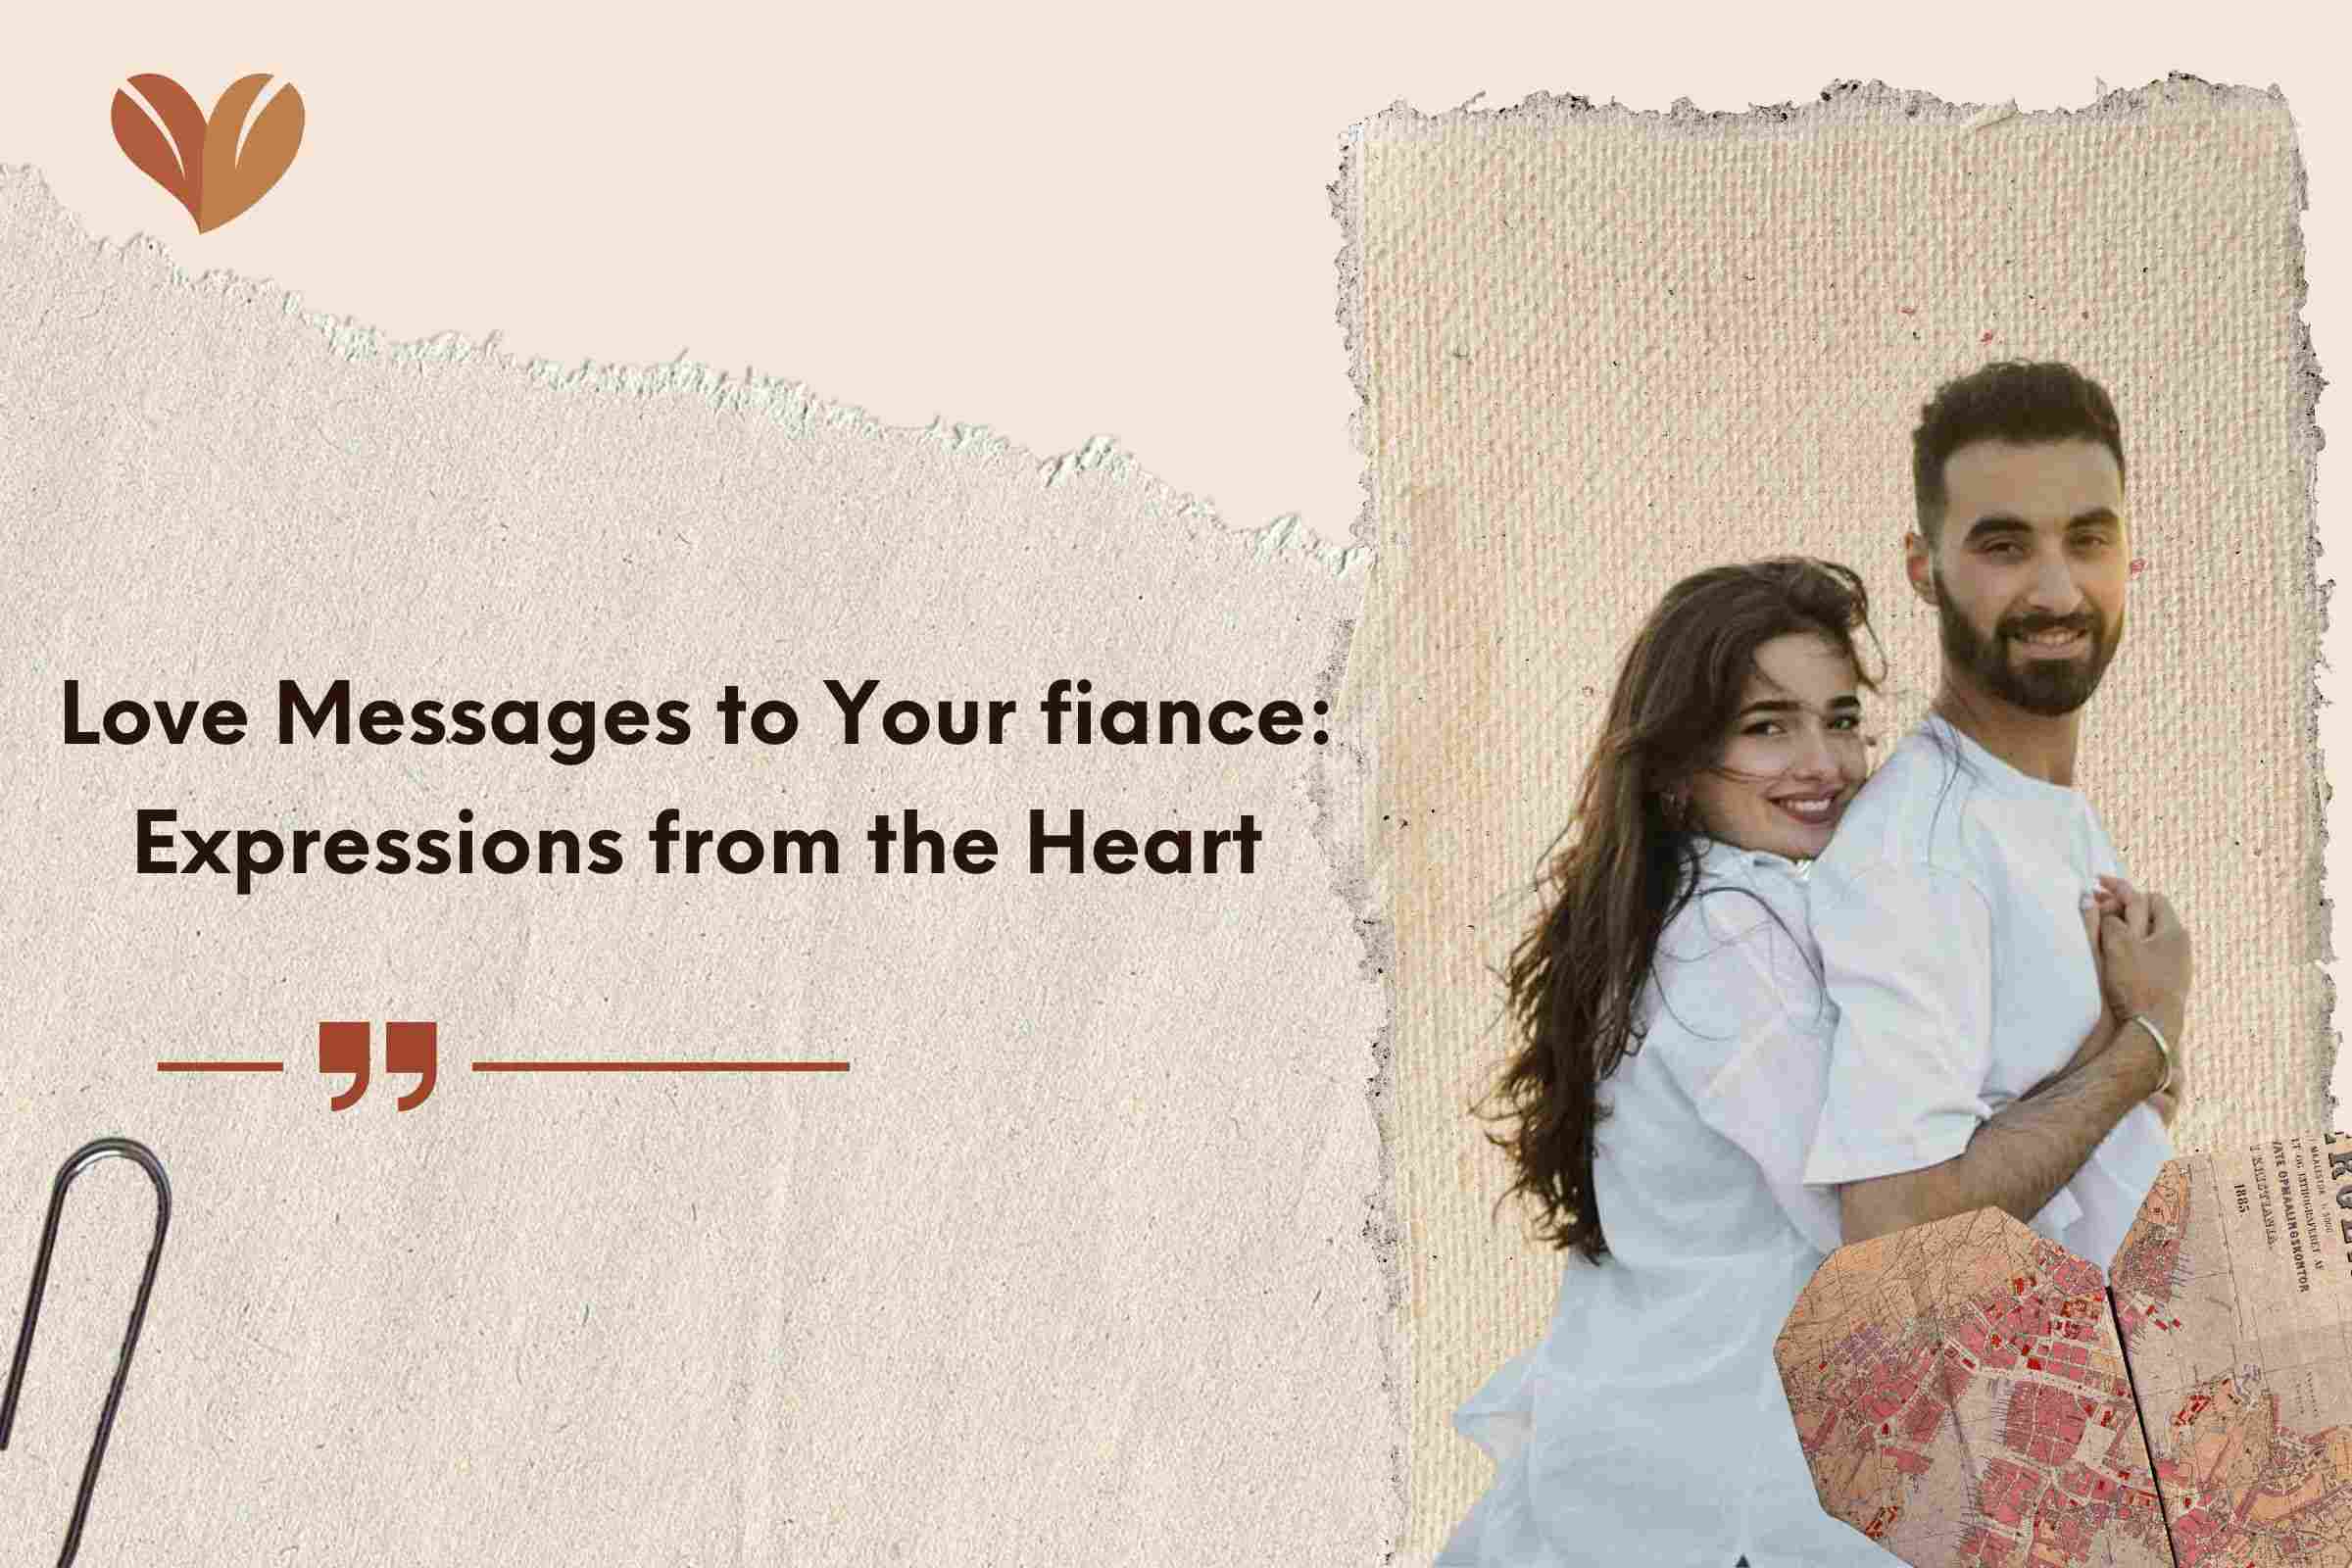 Love Messages to Your fiance: Expressions from the Heart